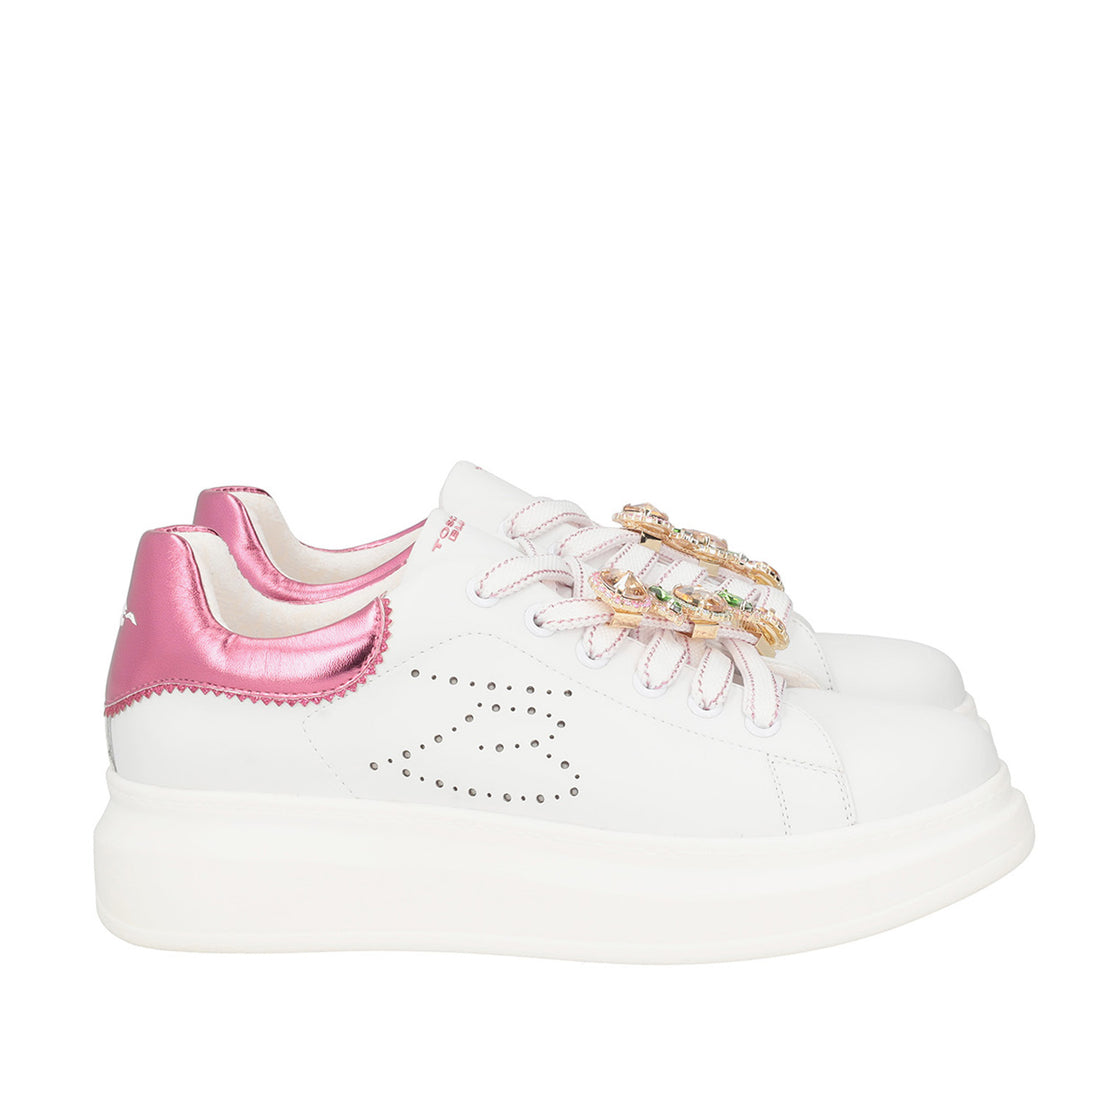 WHITE/FUXIA GLAMOUR  SNEAKER WITH JEWEL CHAIN